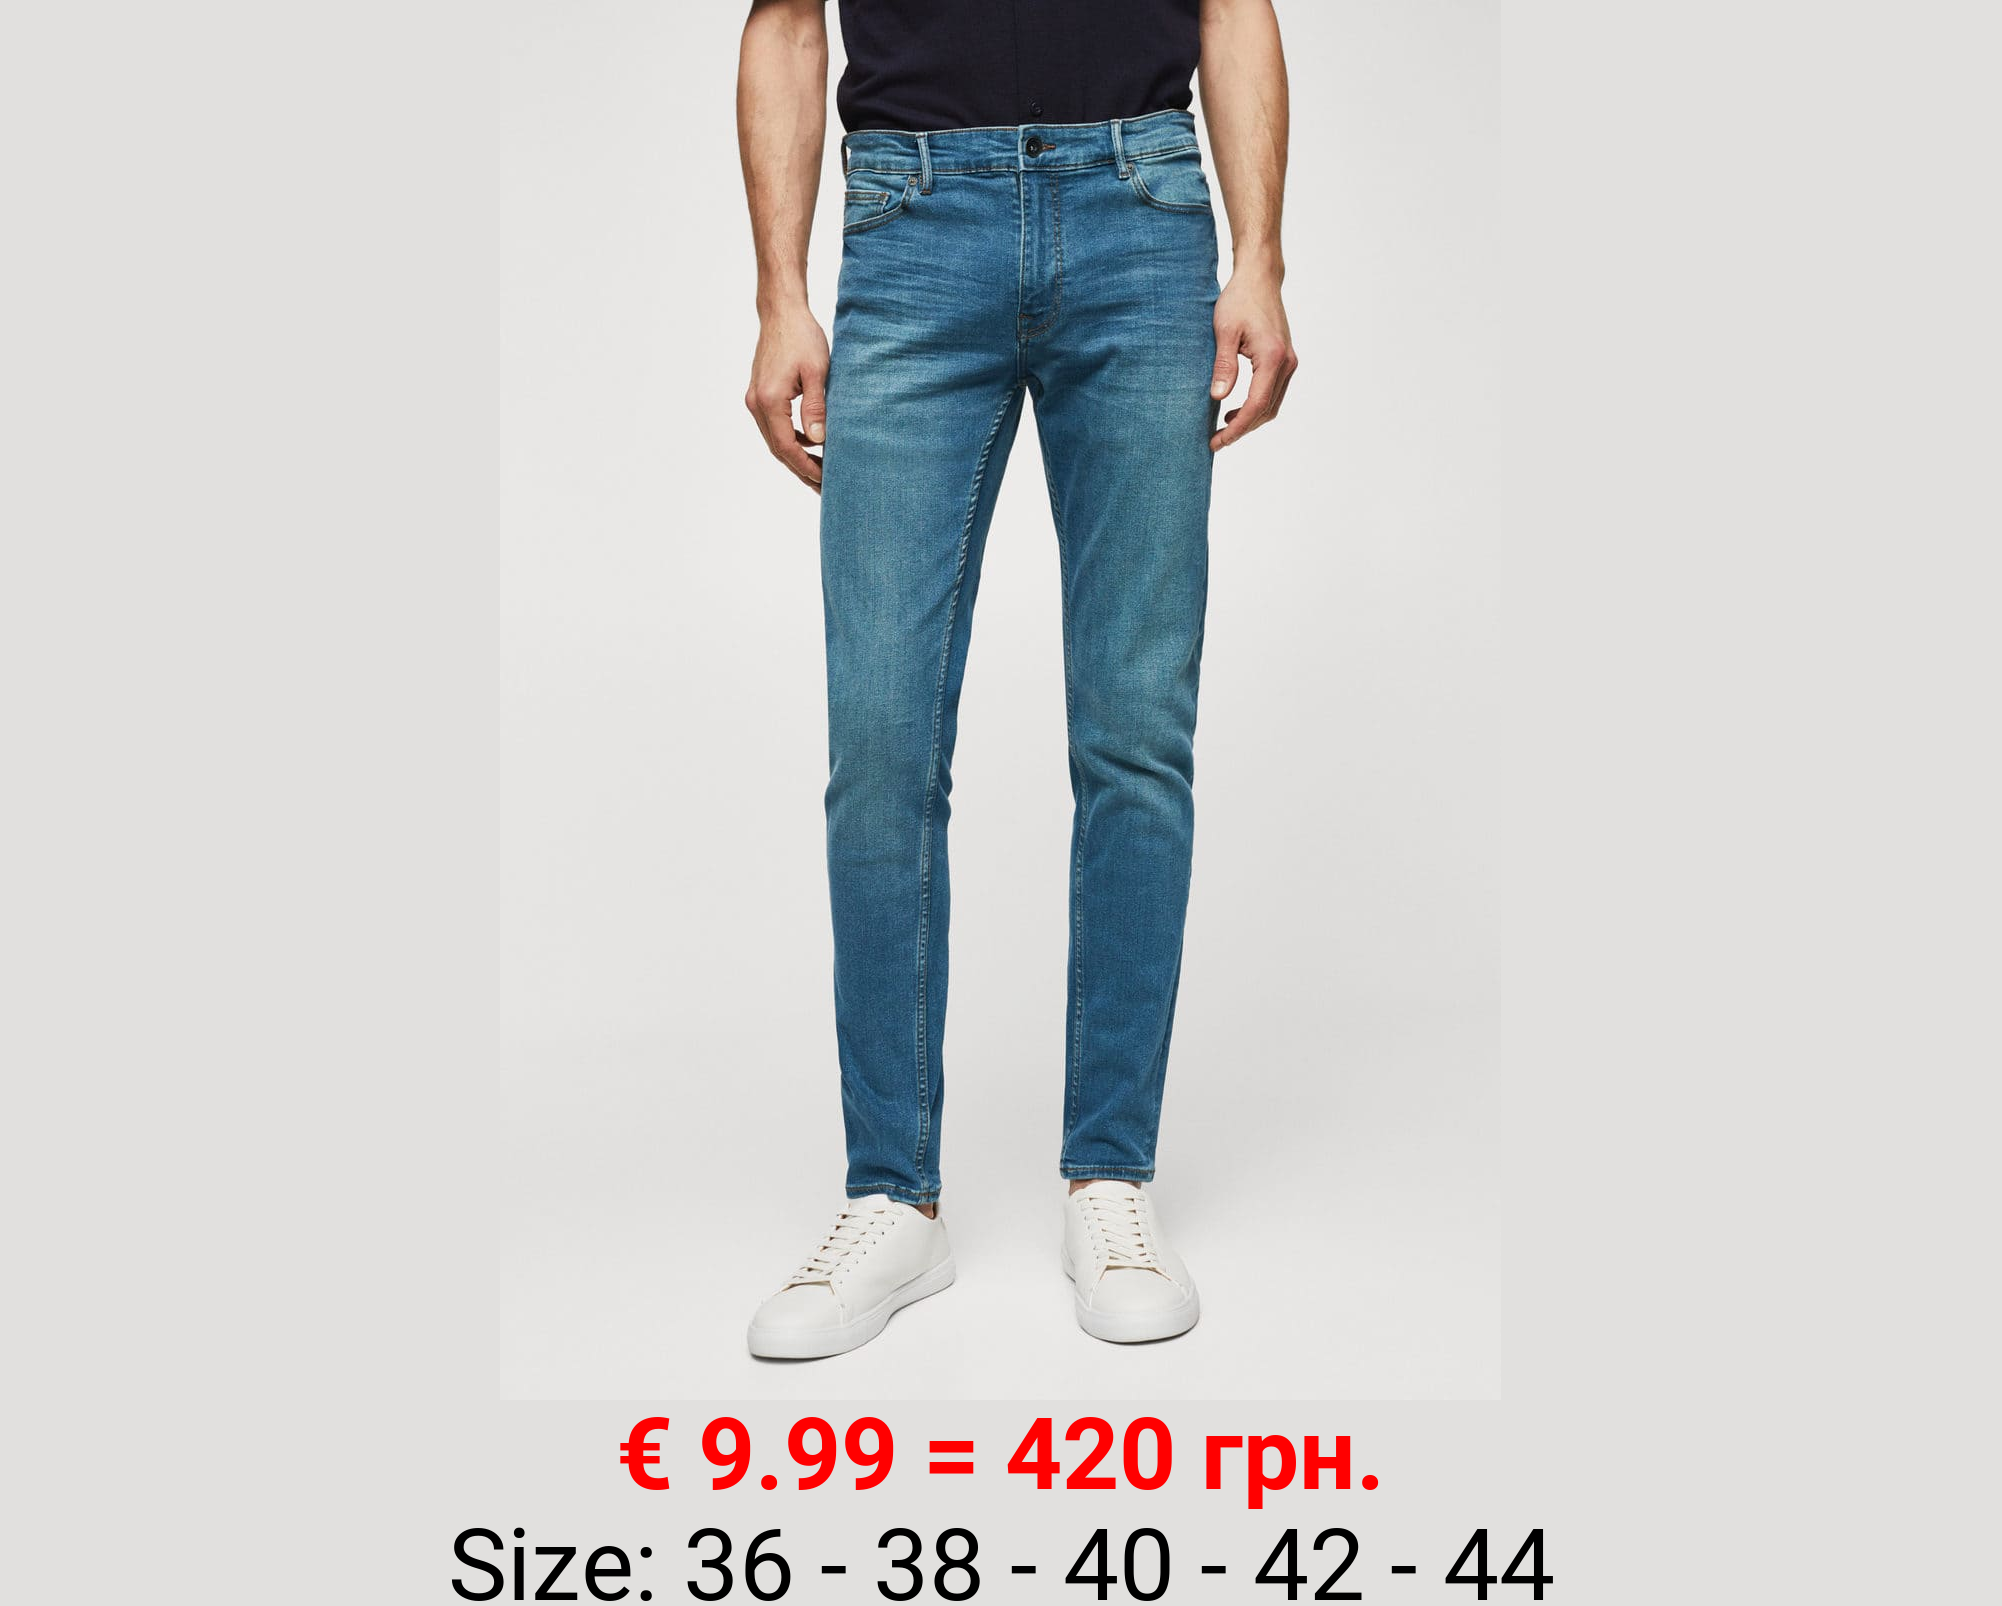 Jeans jude skinny fit